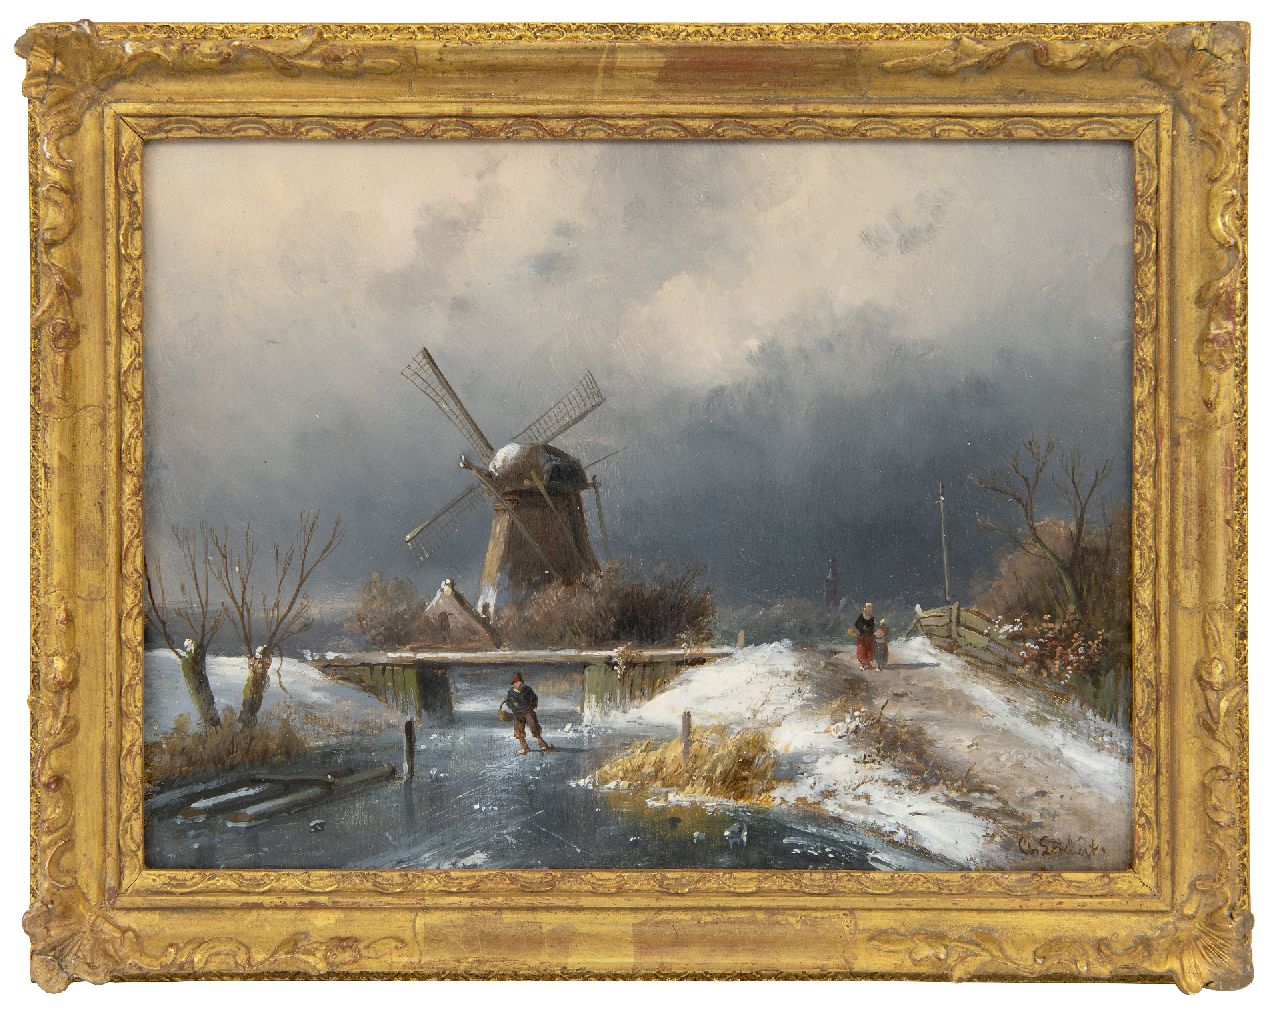 Leickert C.H.J.  | 'Charles' Henri Joseph Leickert, Skater on a frozen water at a windmill, oil on panel 19.2 x 26.0 cm, signed l.r.